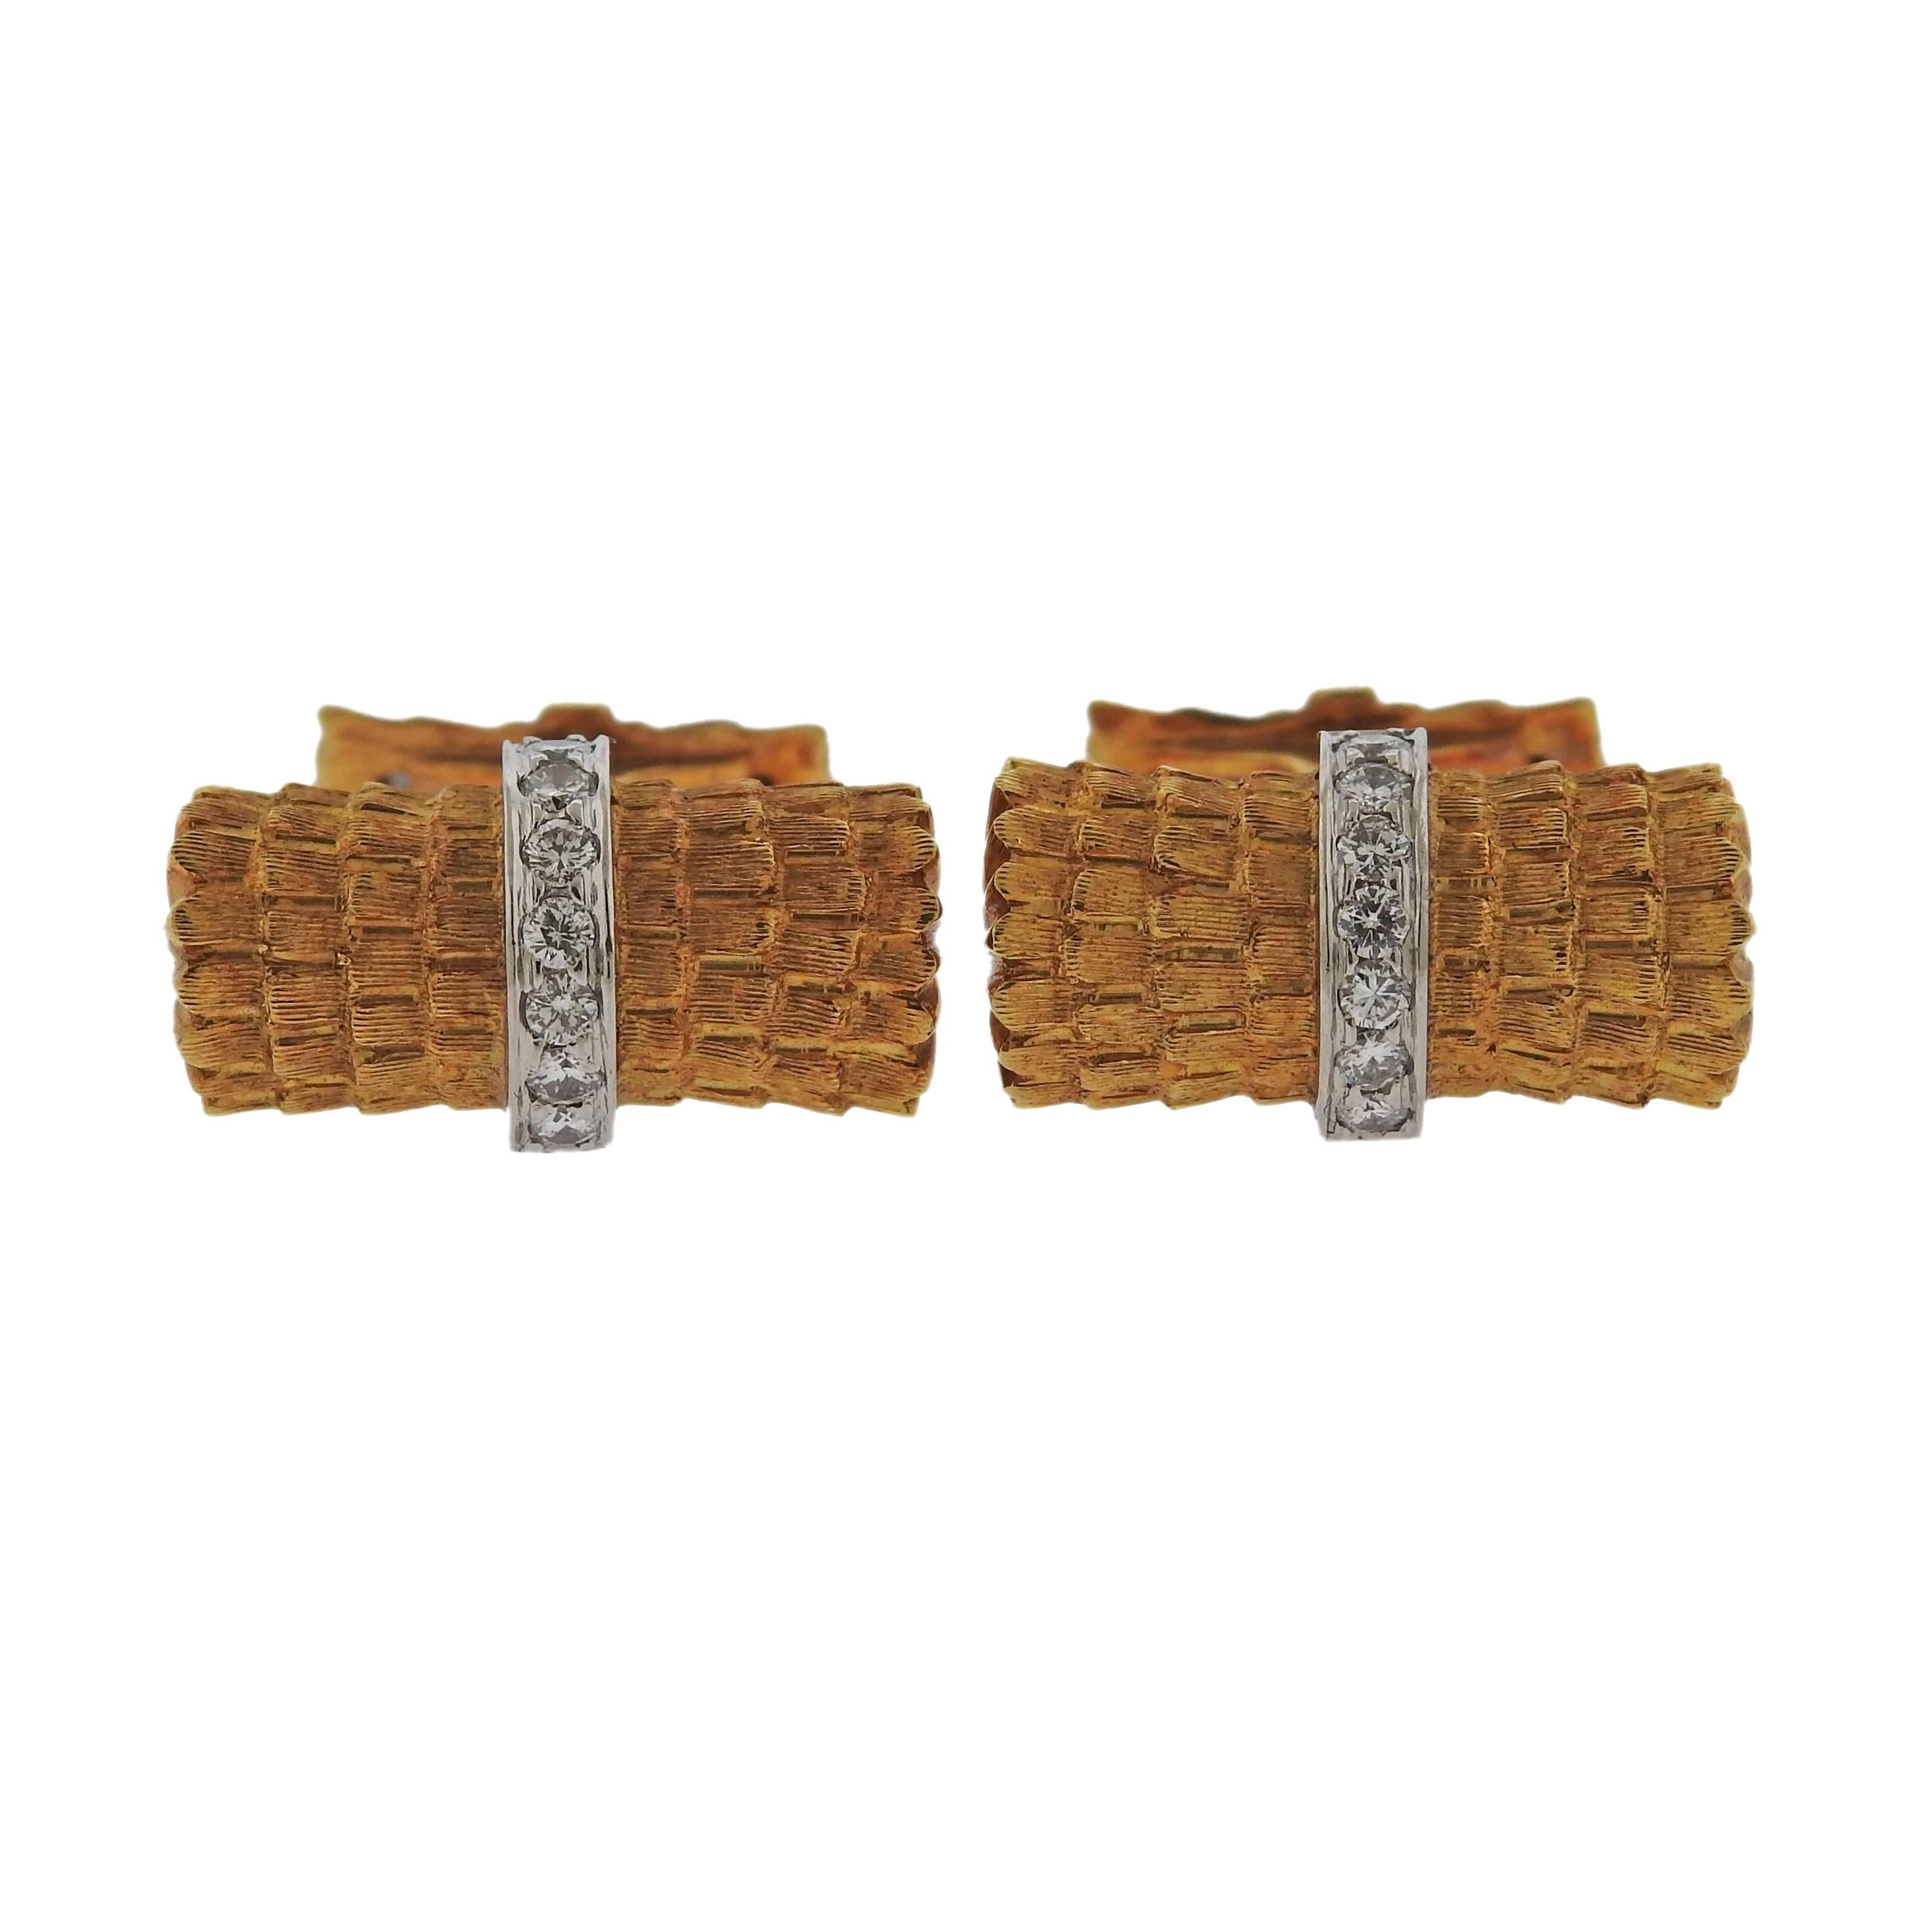 A pair of 18k gold and diamond cufflinks by Tiffany & Co. Cufflink tops measure 21mm x 11mm. Cufflinks are marked Tiffany & Co., 18K. Weigh 15.6 grams. 